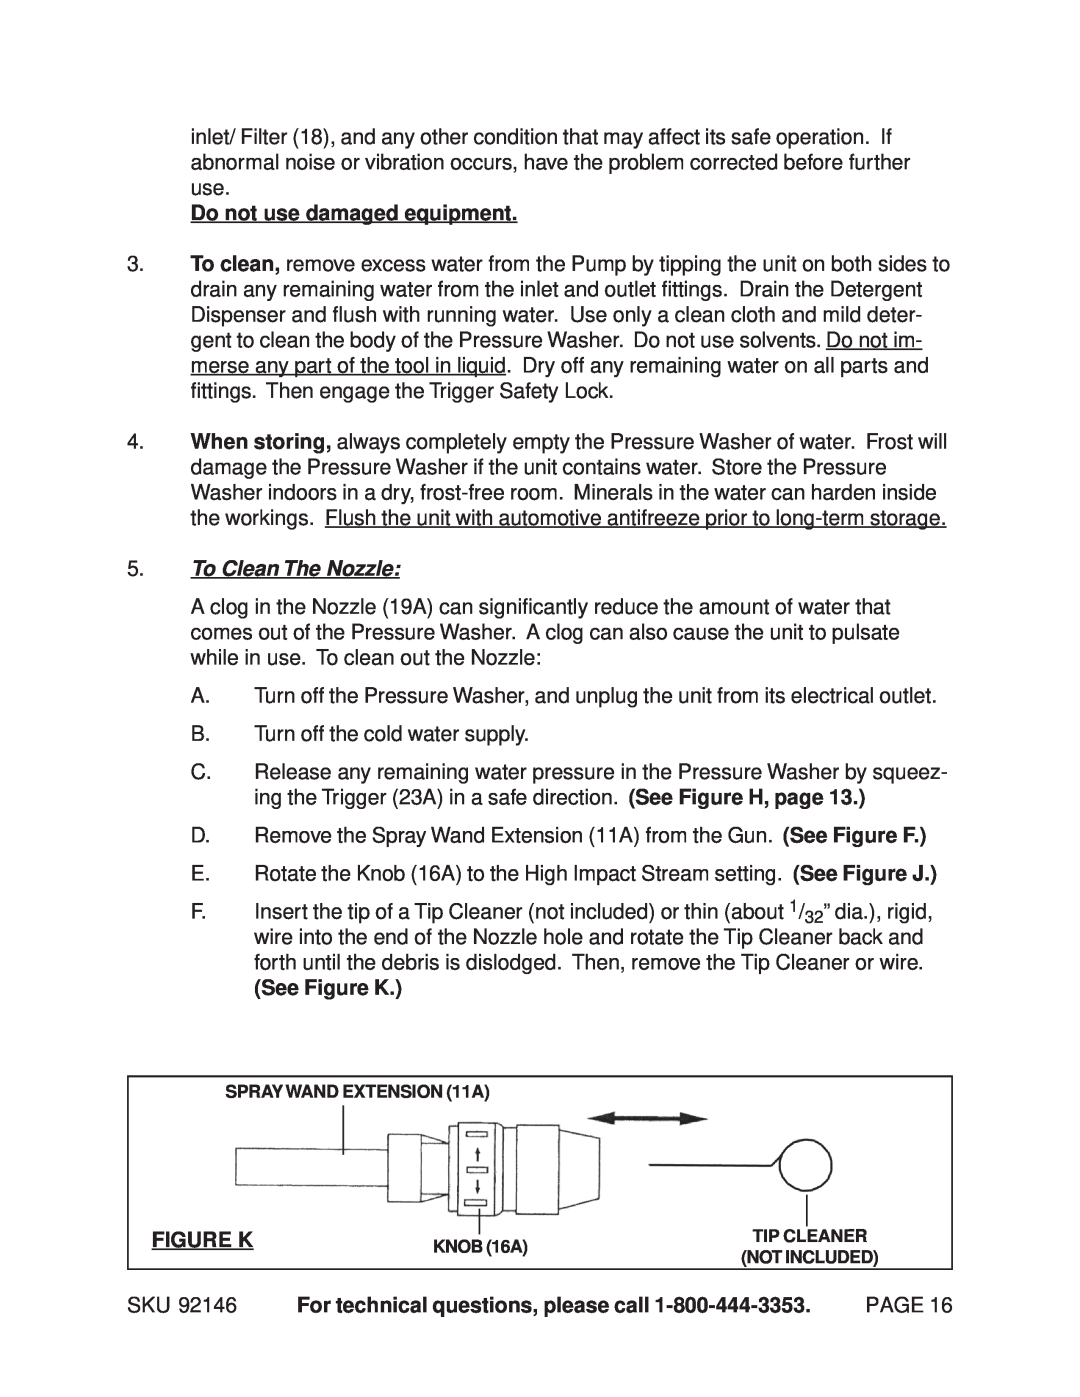 Chicago Electric 92146 manual Do not use damaged equipment, To Clean The Nozzle, See Figure K 